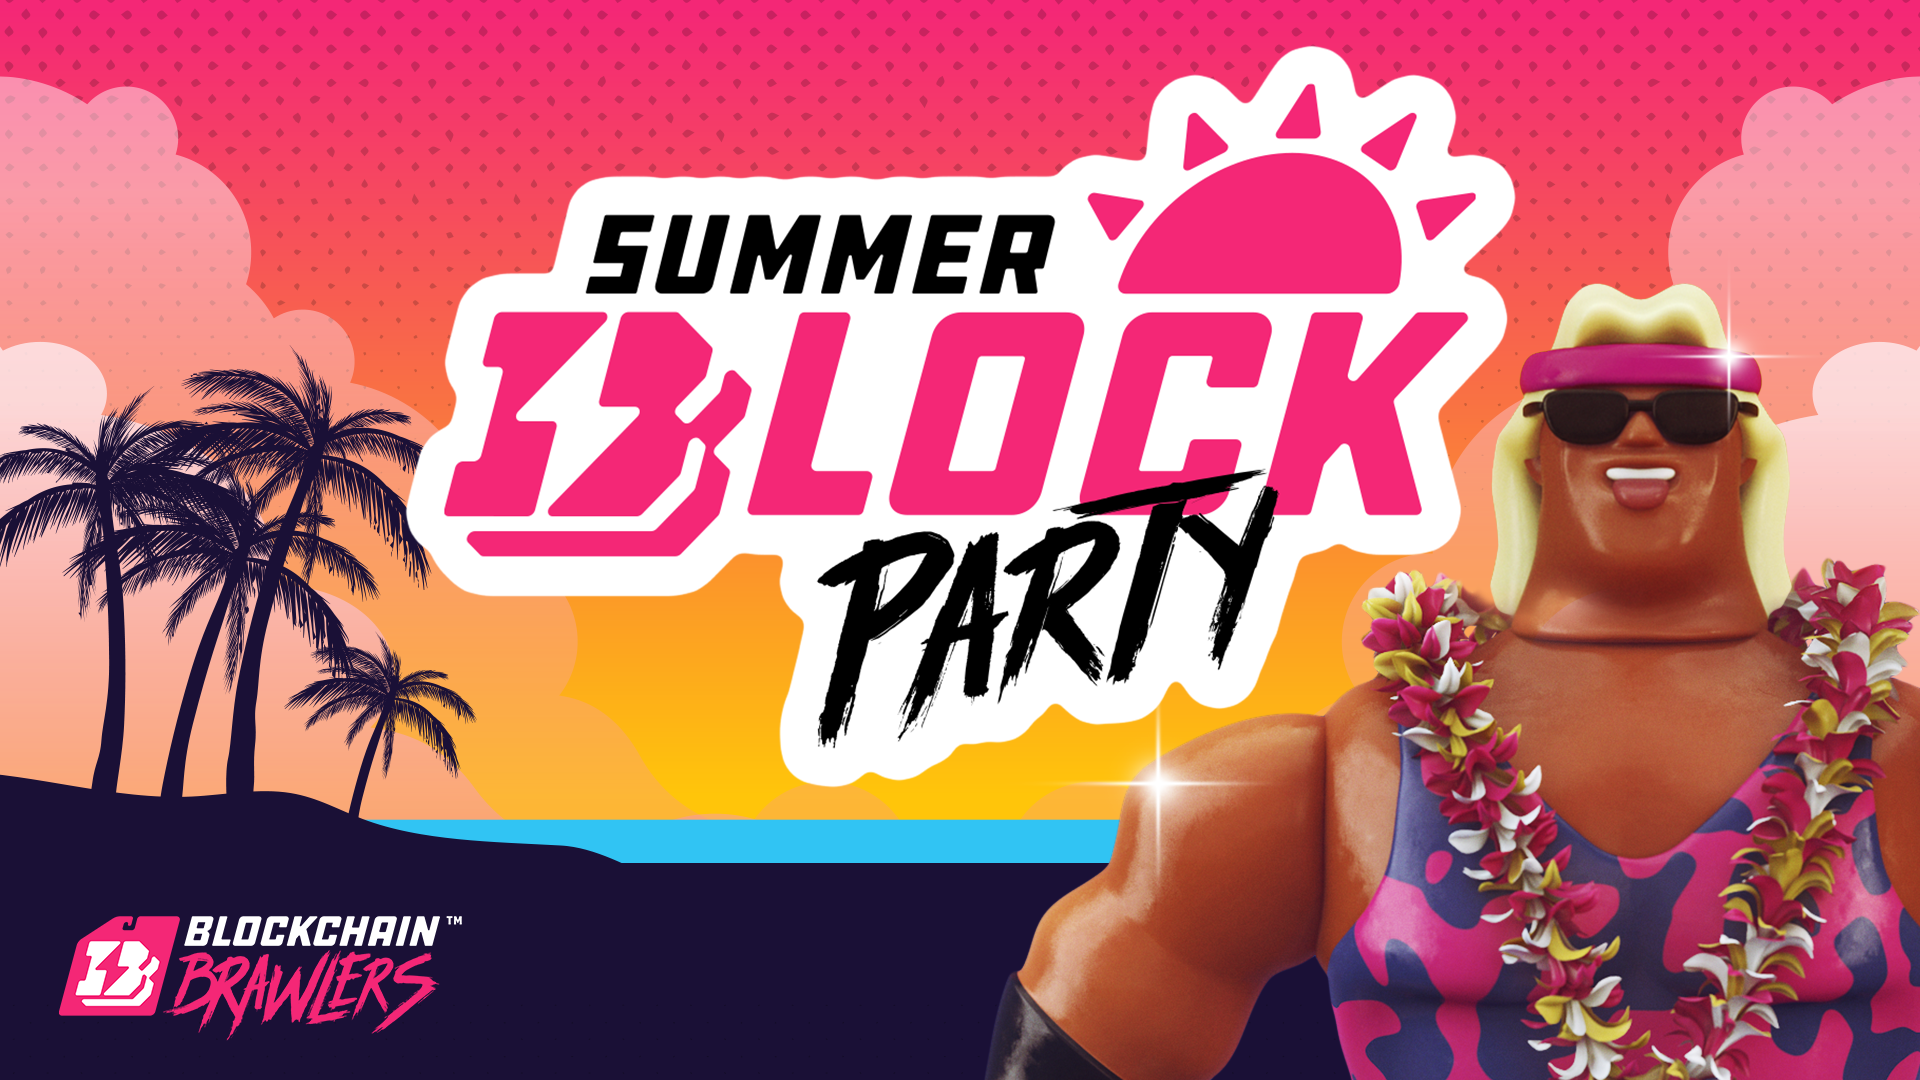 Featured image for “BLOCKCHAIN BRAWLERS SUMMER BLOCK PARTY!”